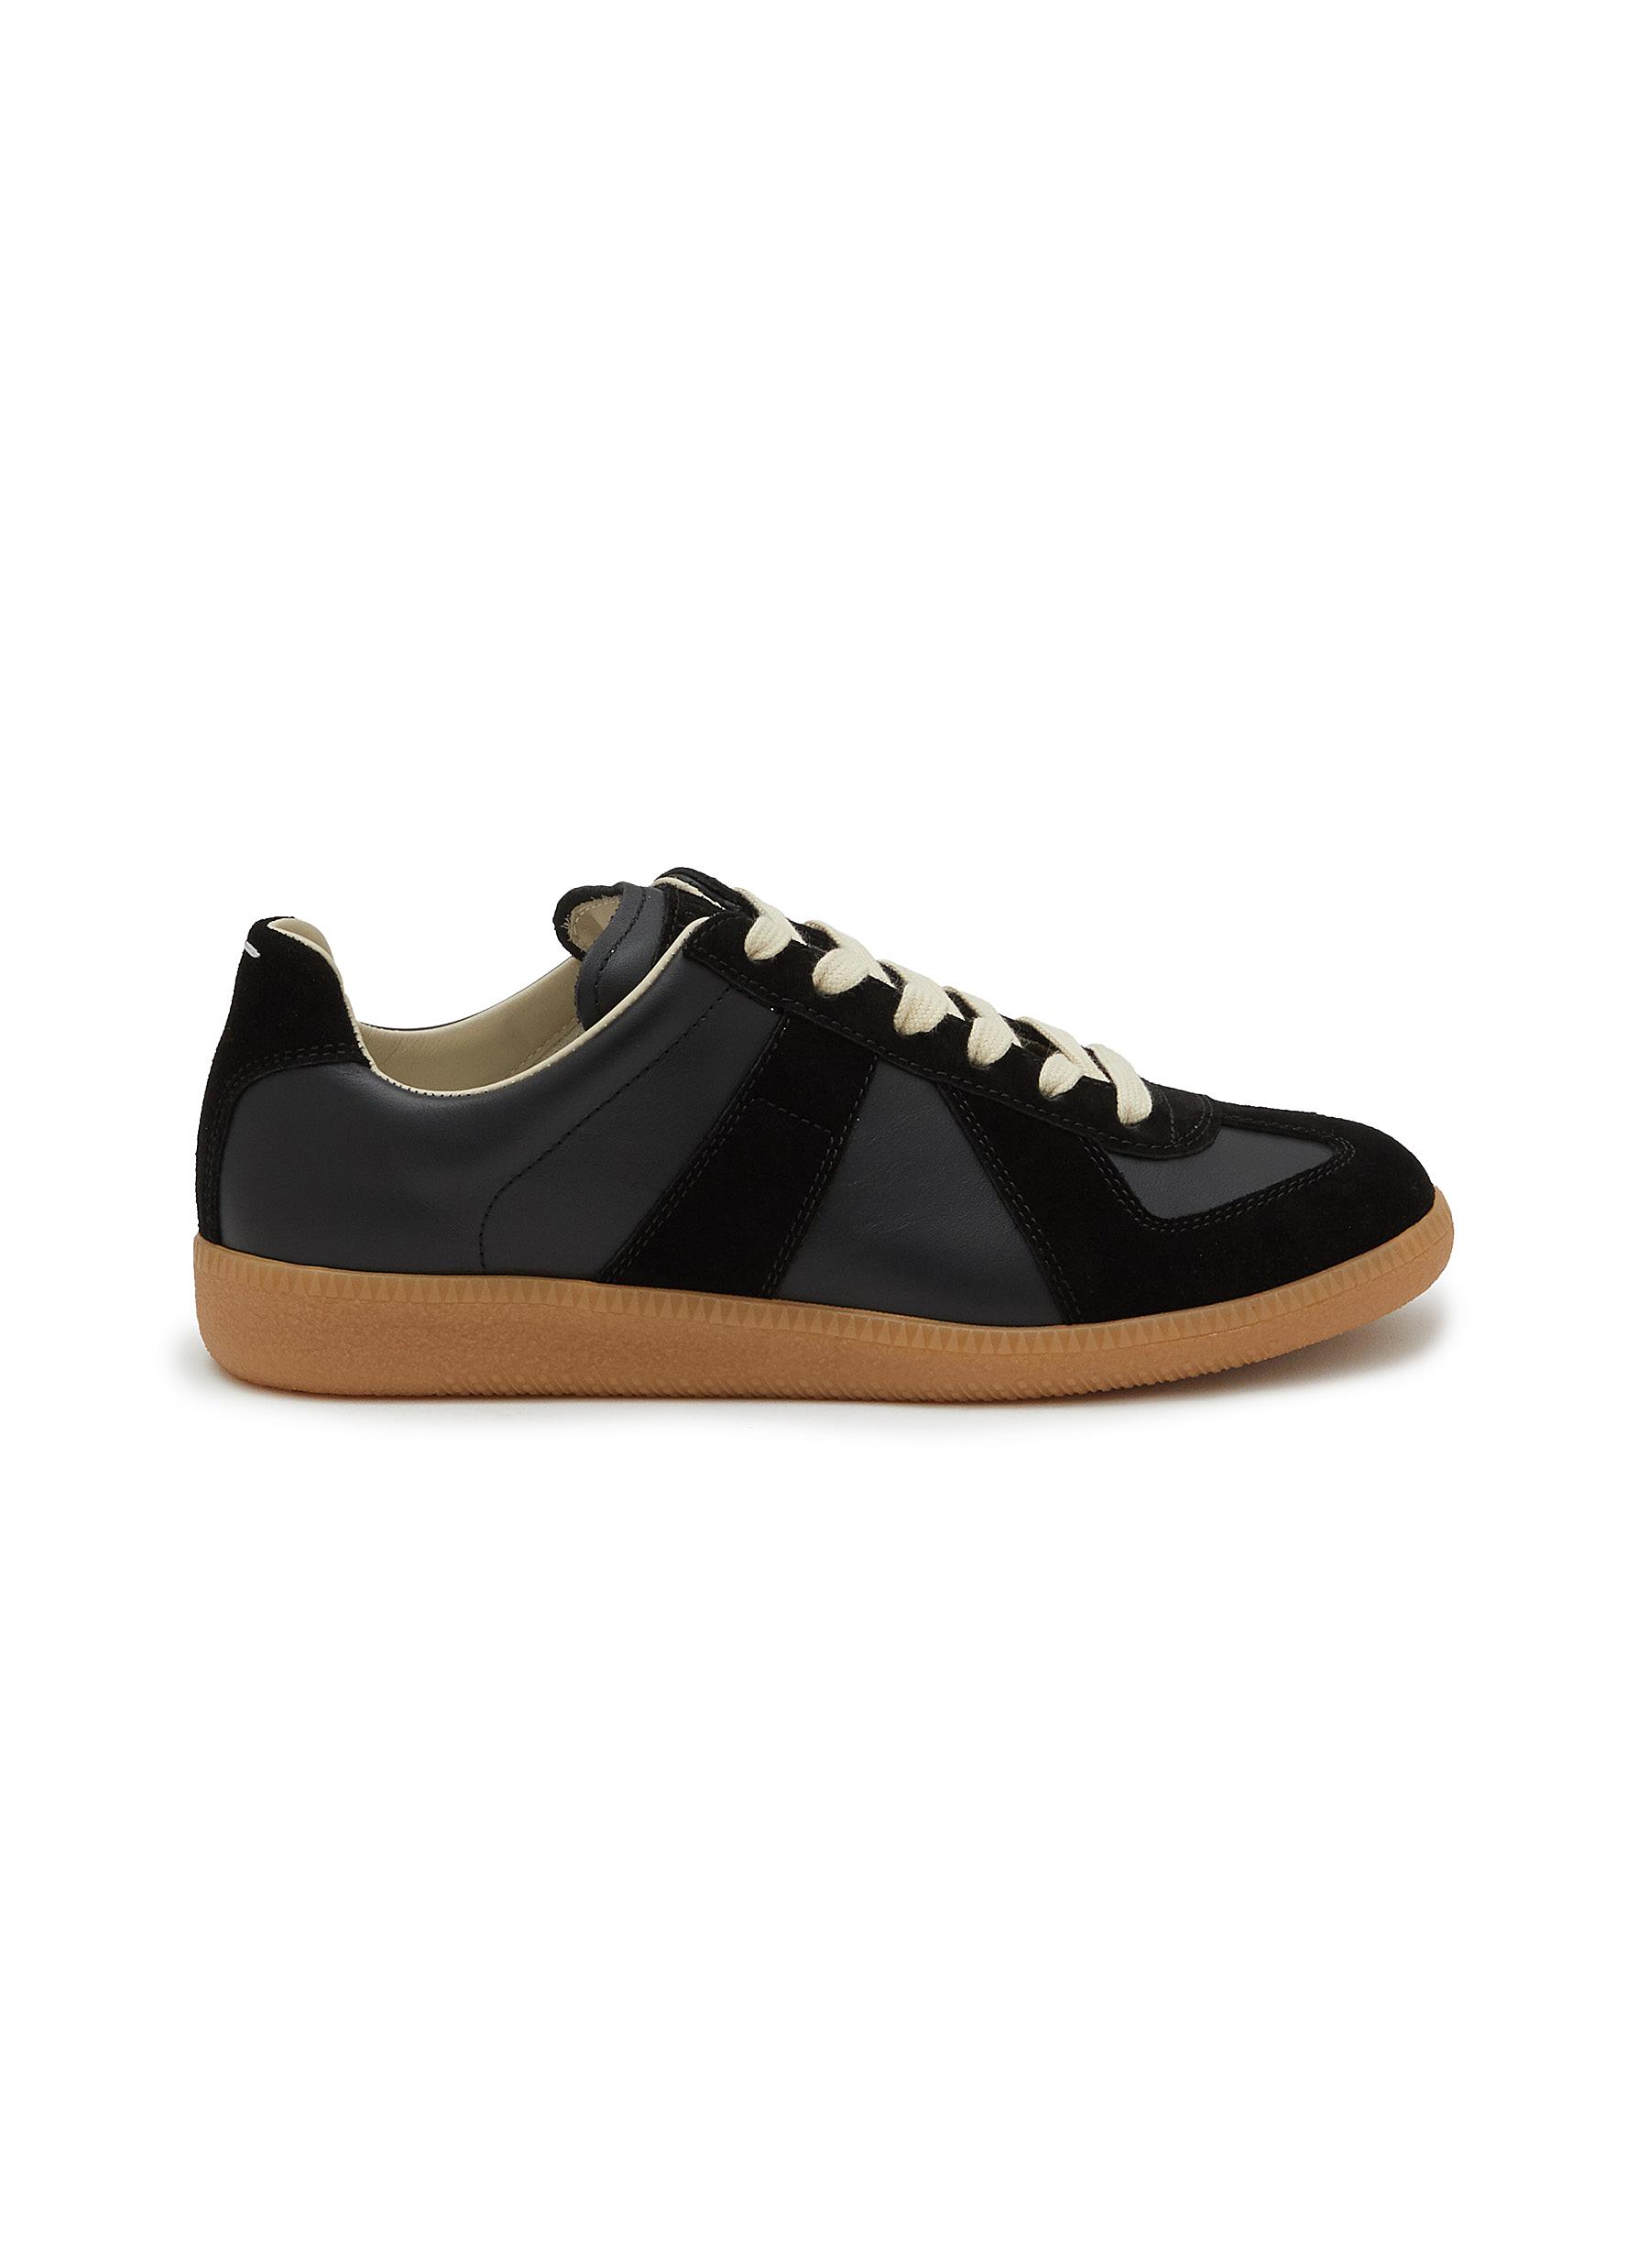 Pounding over Ulempe MAISON MARGIELA | Replica Leather Low Top Sneakers | Women | Lane Crawford